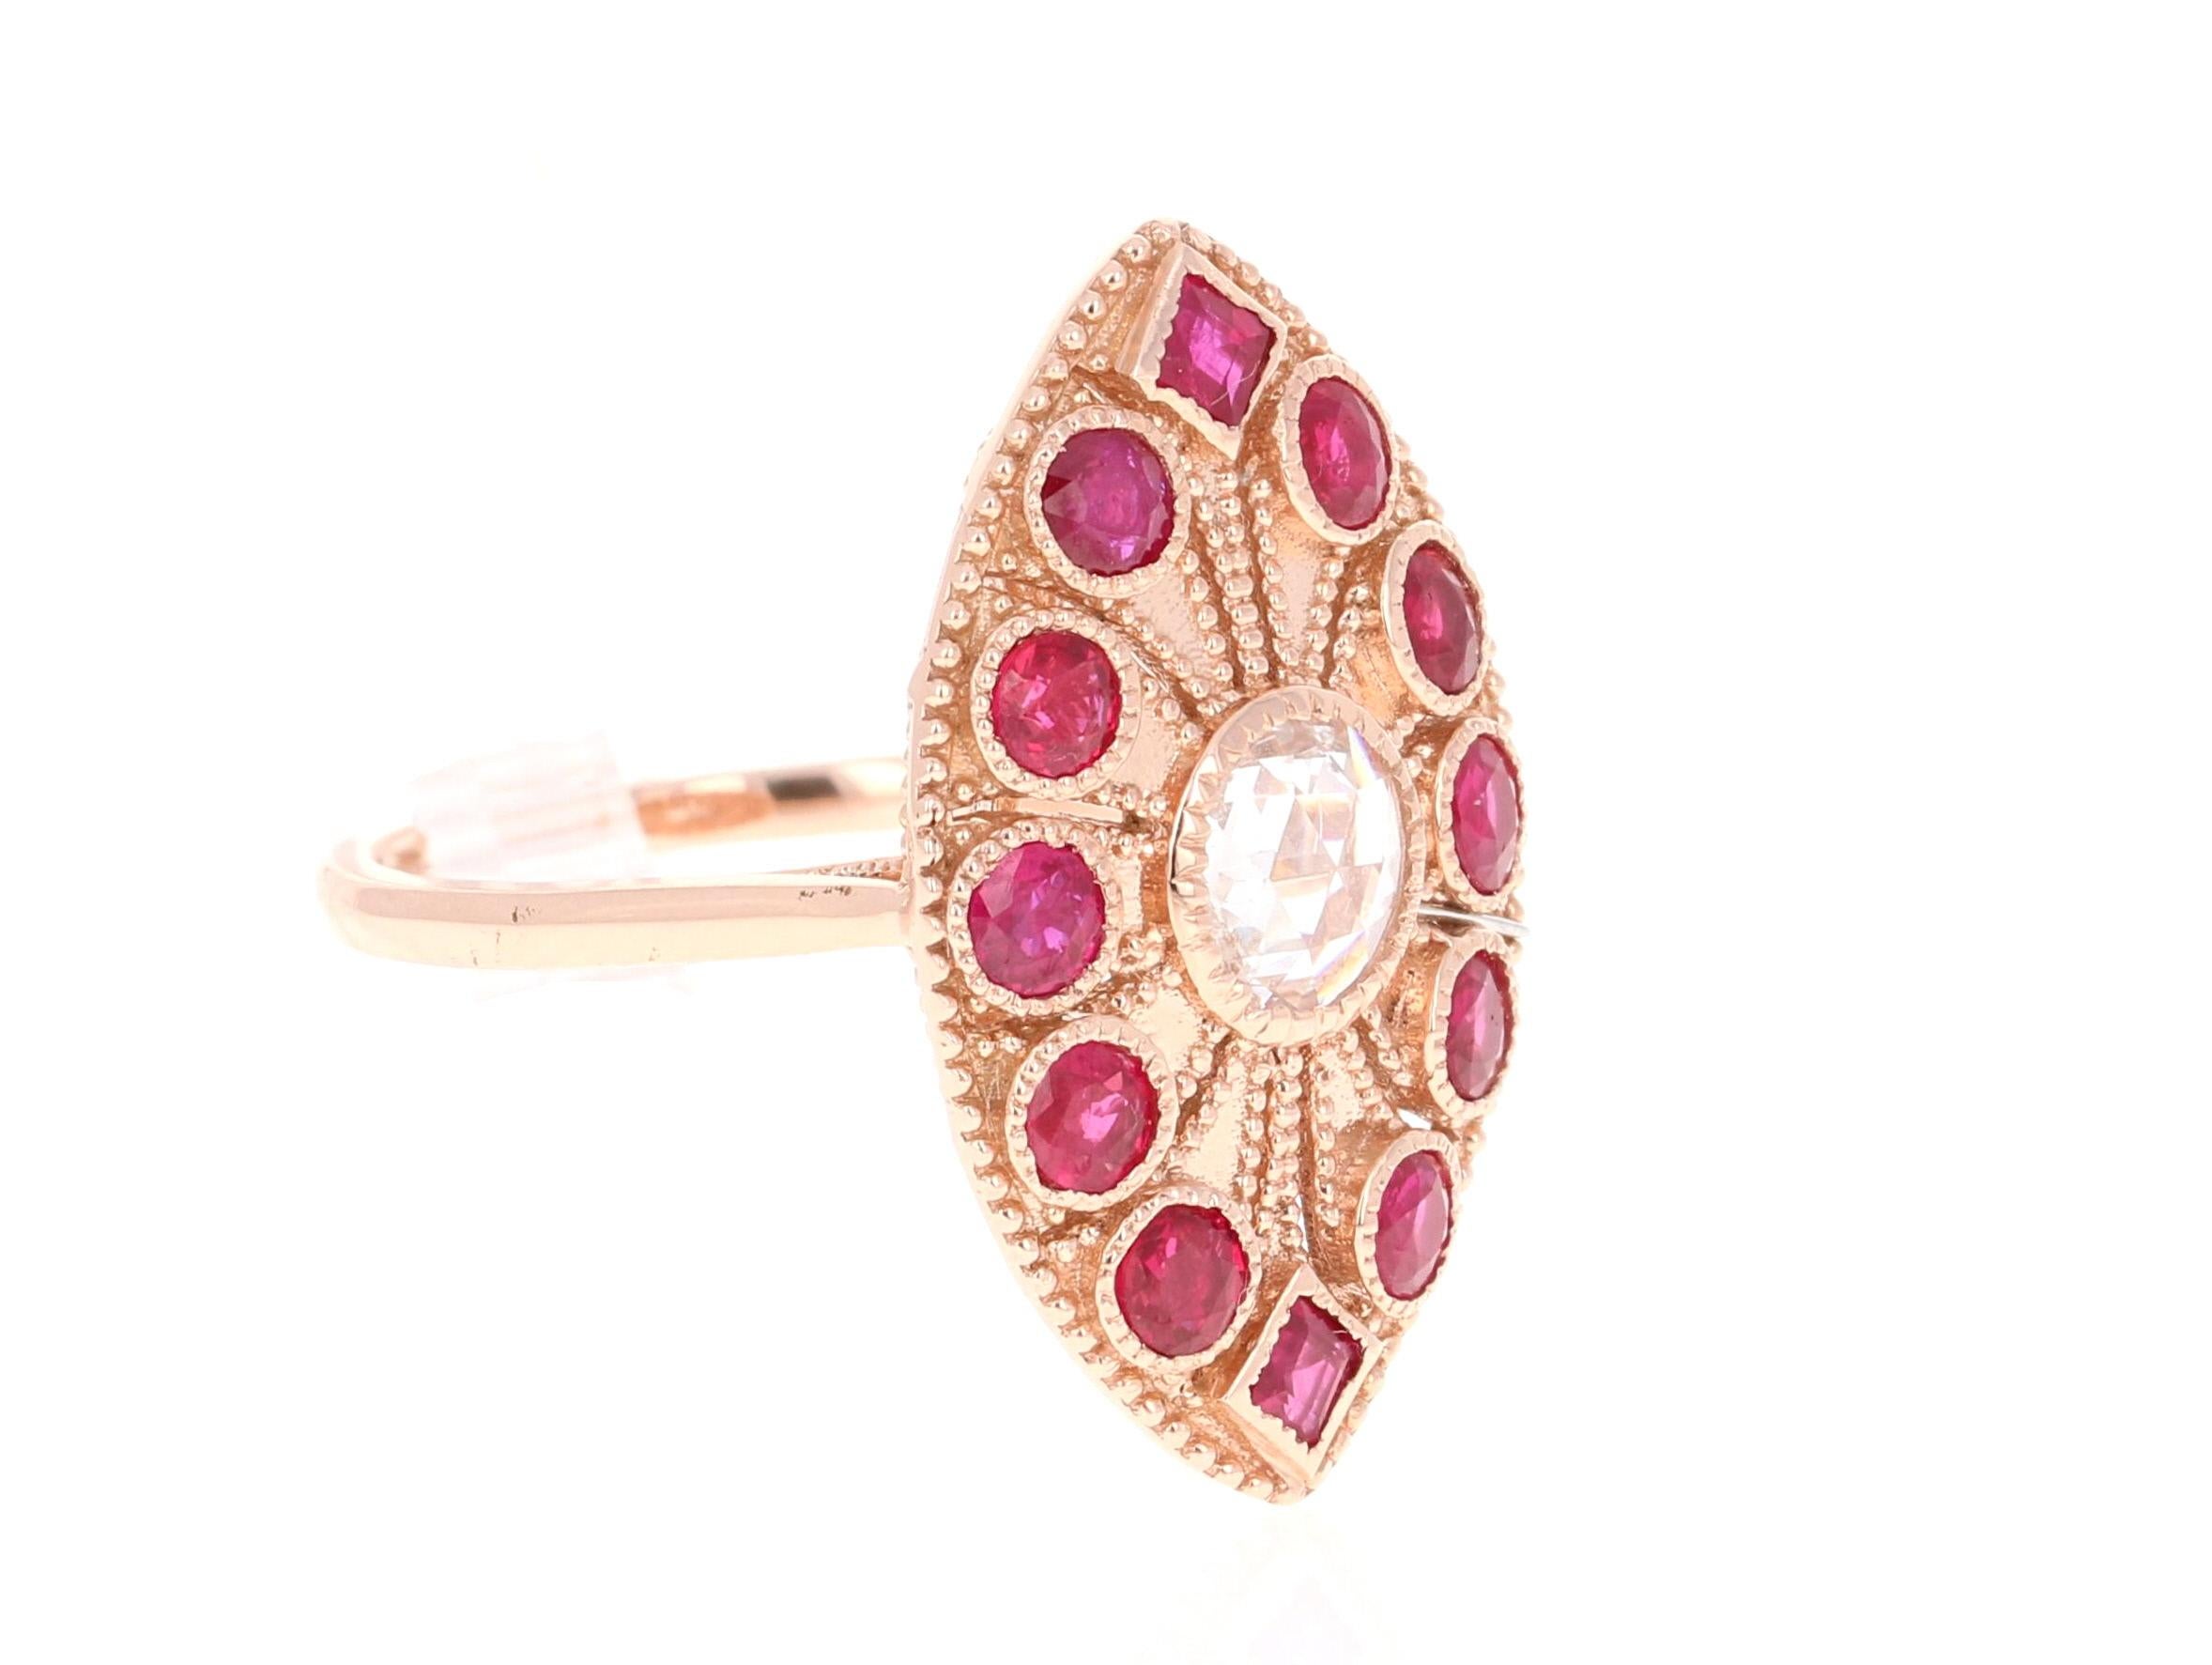 A real statement piece - Ruby and Rose Cut Diamond Cocktail Ring in 14 Karat Rose Gold!
This ring has a stunning Rose Cut Diamond that weighs 0.39 Carats and has 12 Round Cut Rubies that weigh 1.70 Carats.The Total Carat Weight of the Ring is 2.09